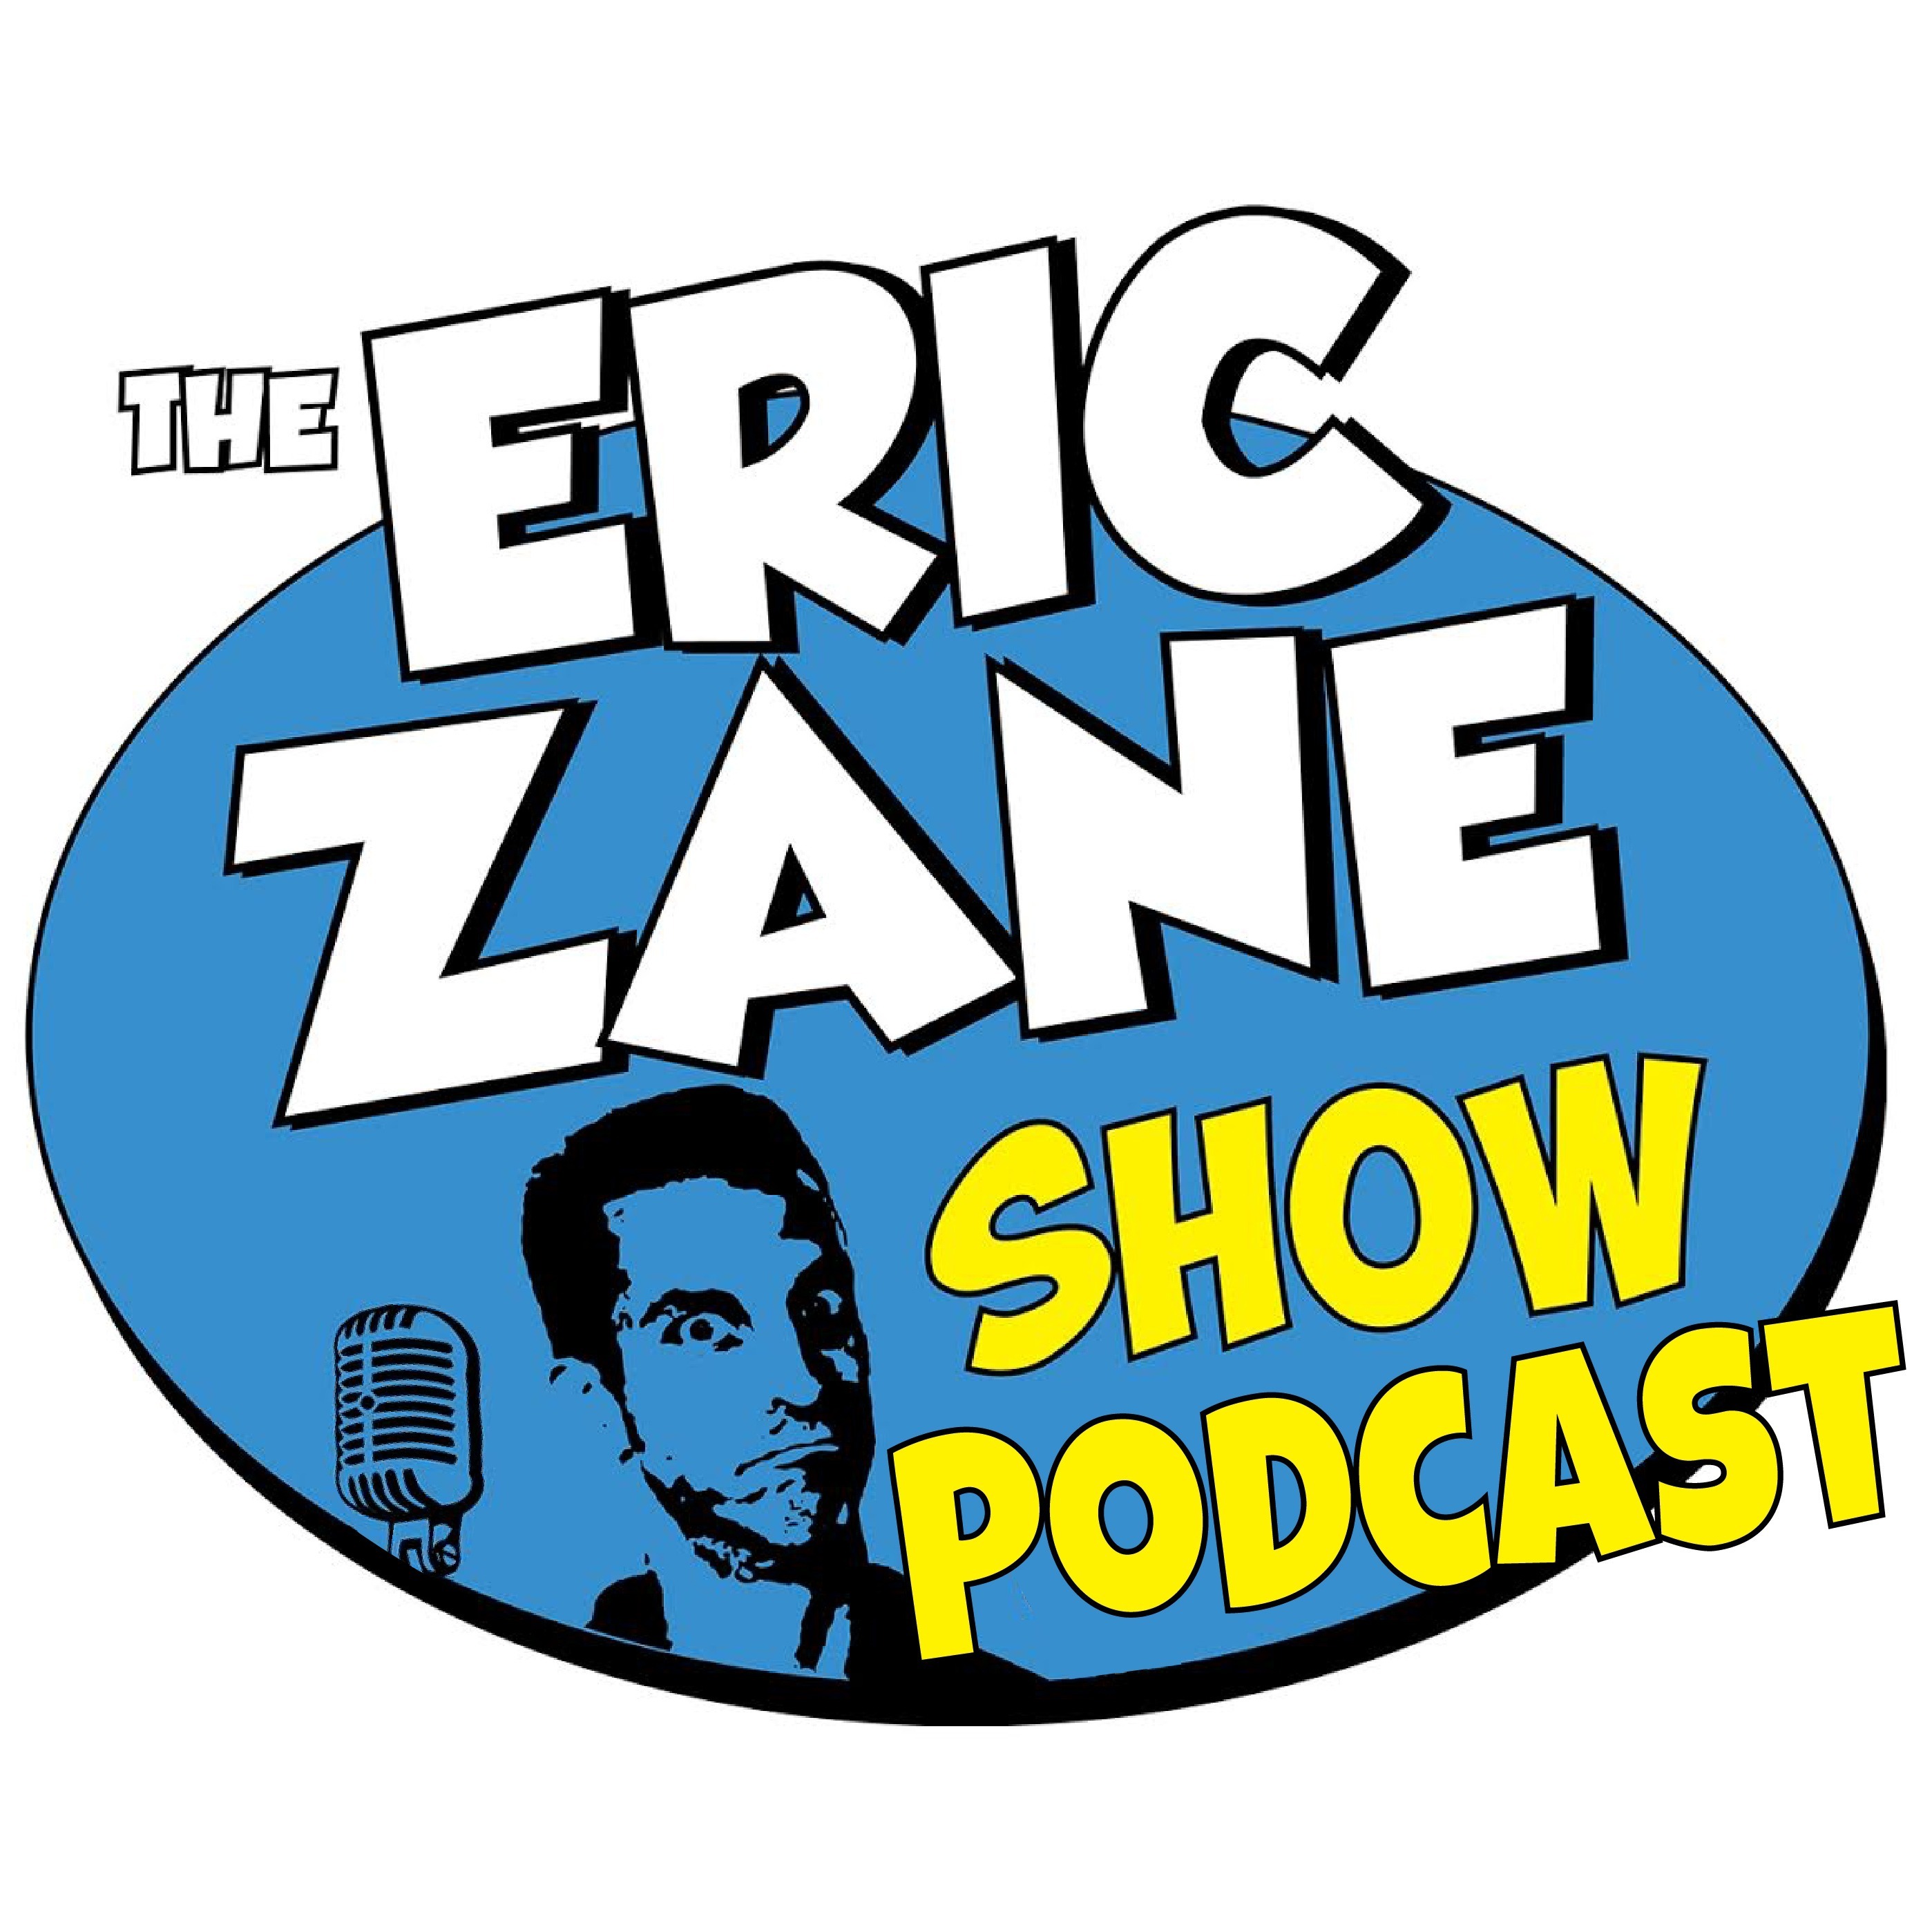 Eric Zane Show Podcast 792 Diana's patience wearing thing!